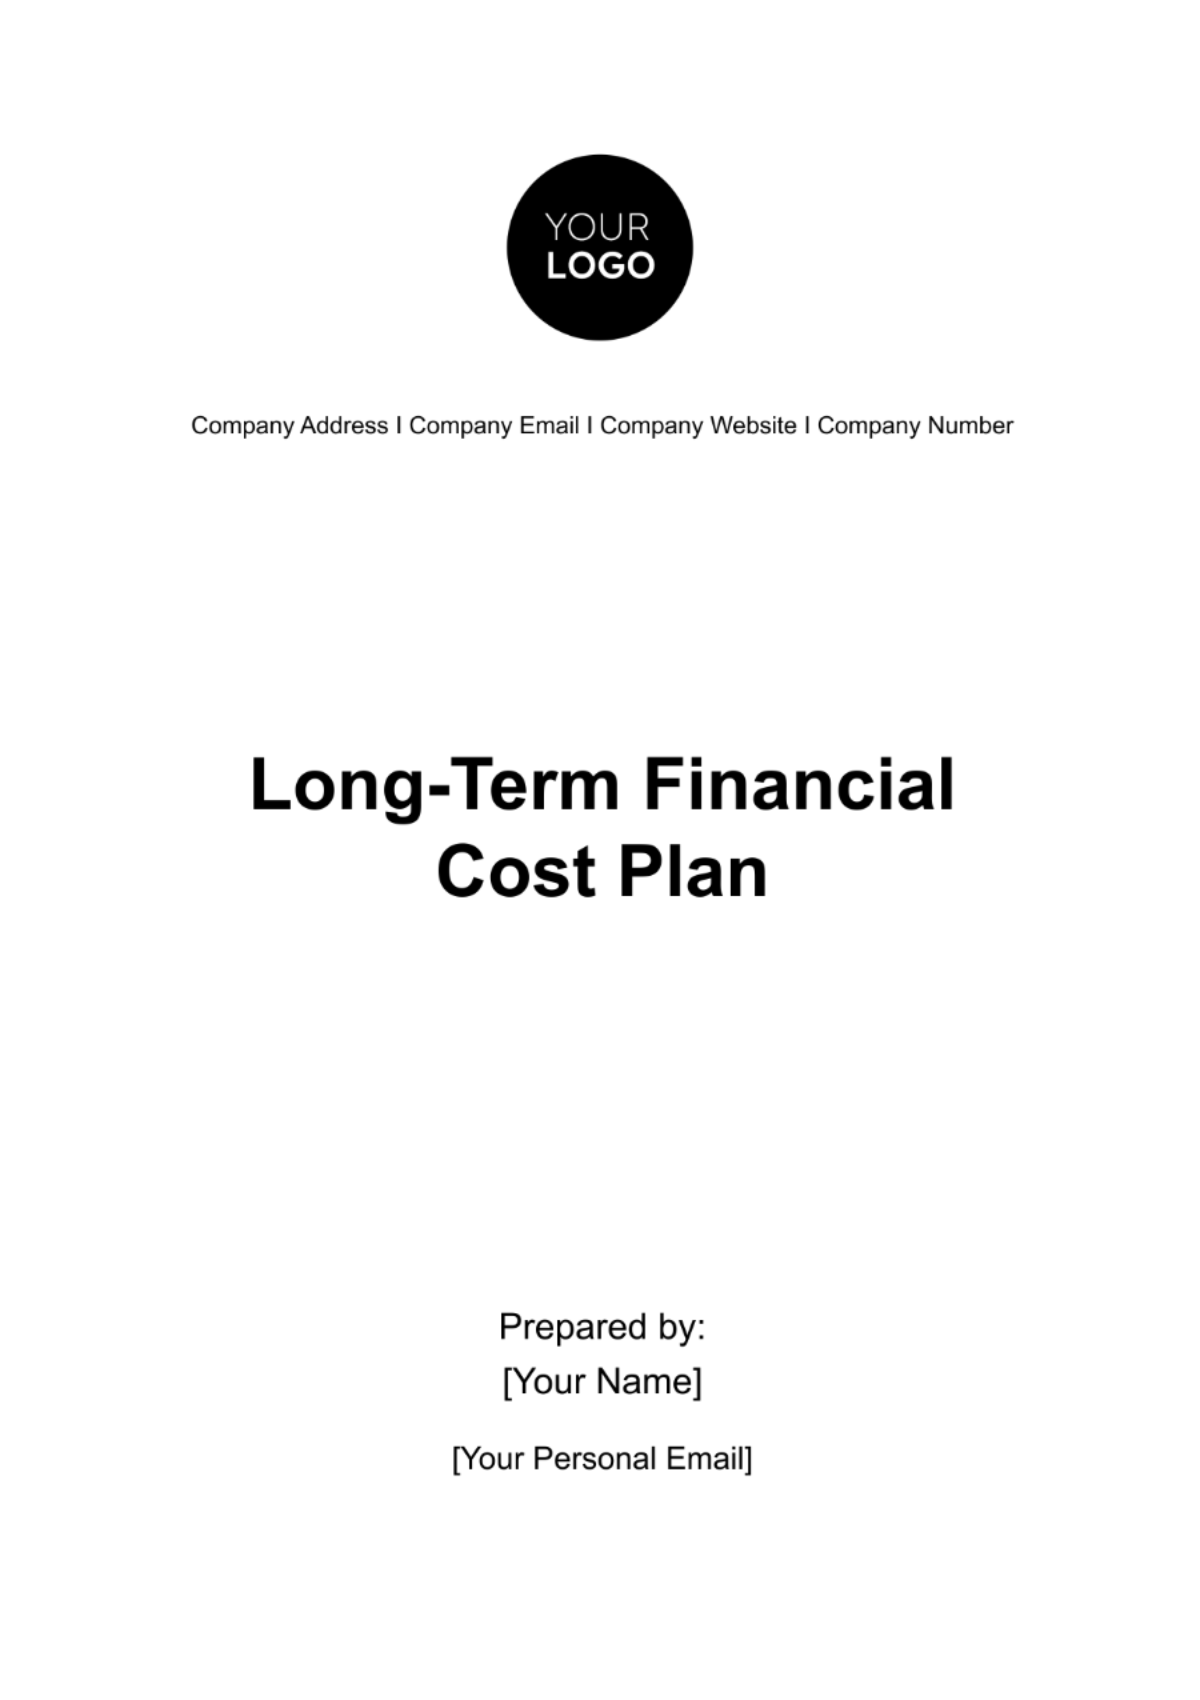 Free Long-Term Financial Cost Plan Template